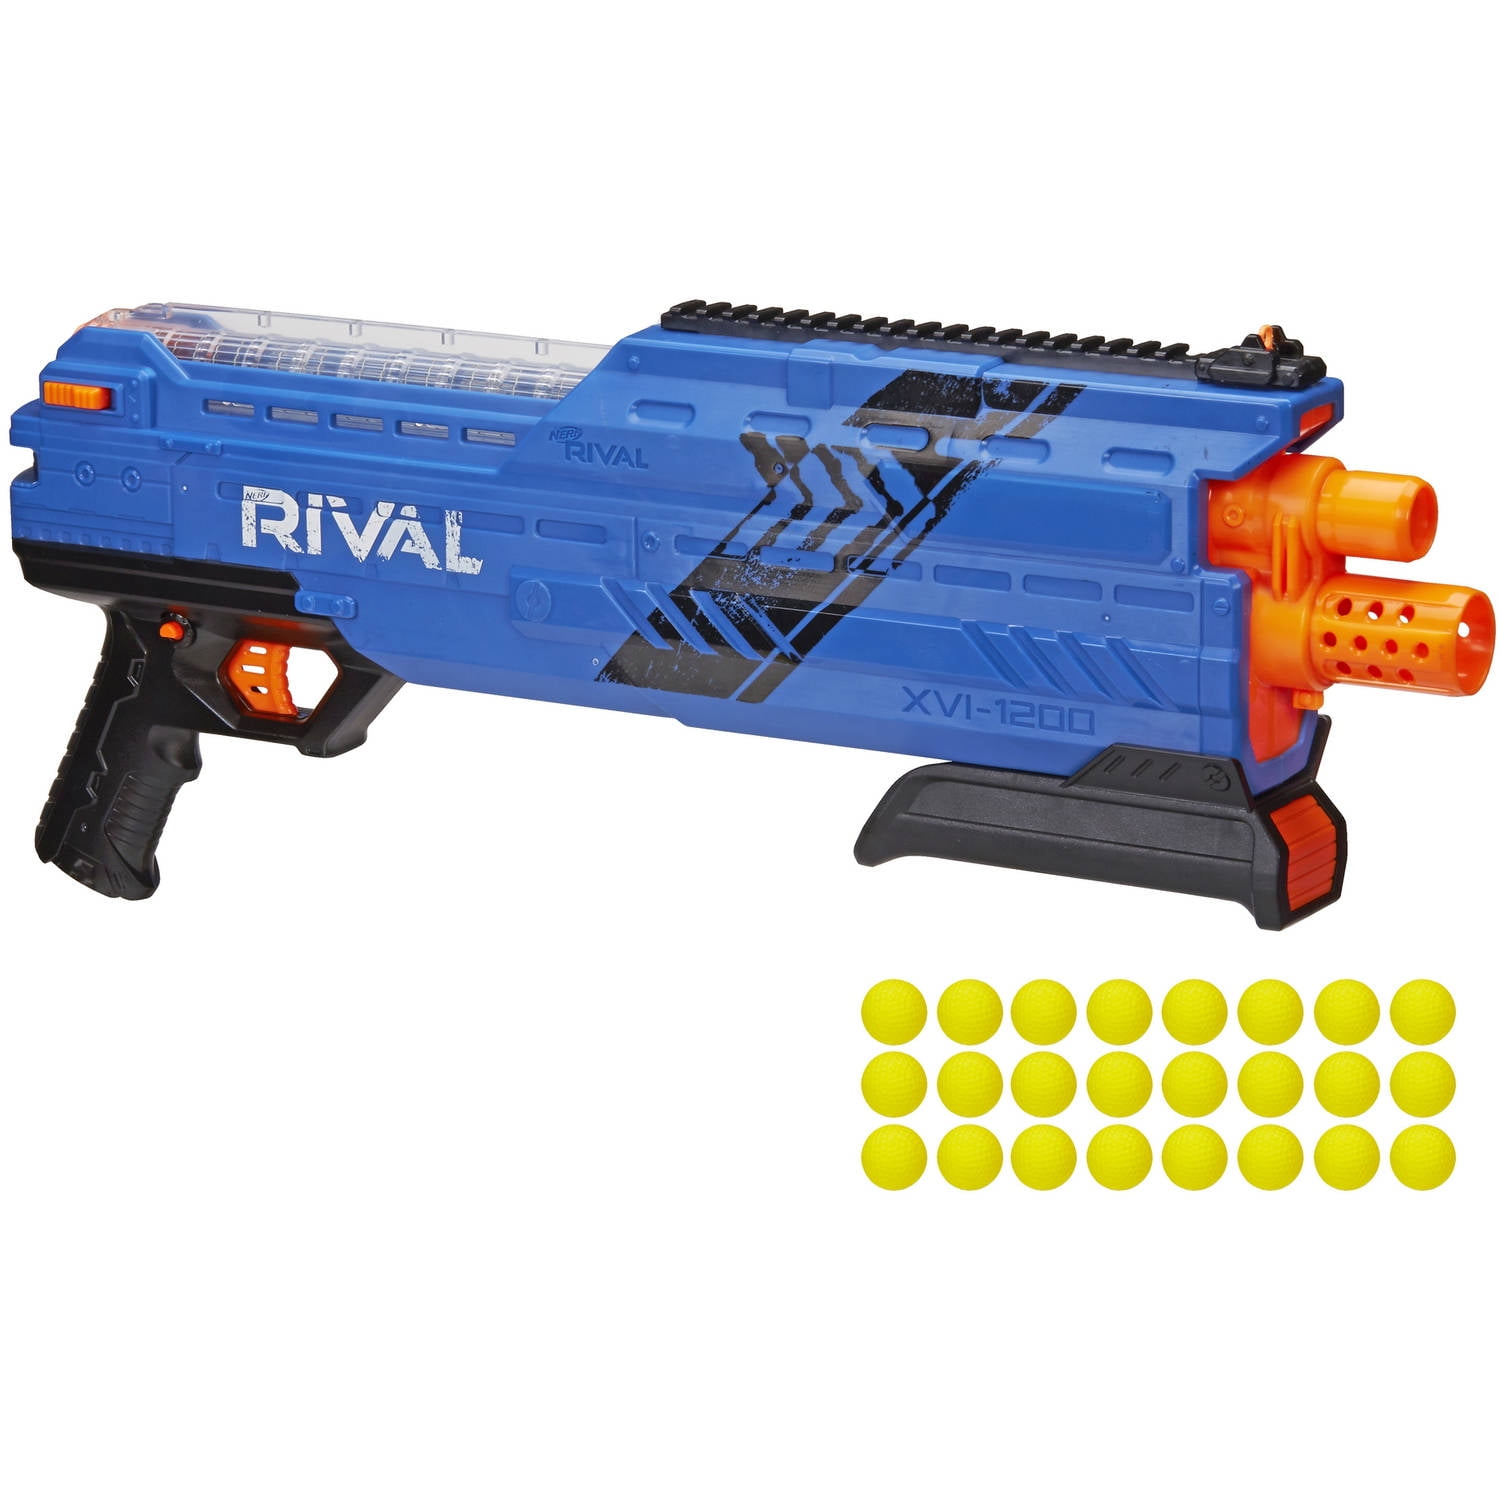 NERF Rival Zeus Mxv-1200 Blaster Red B1592 With 10 Rounds for sale online 